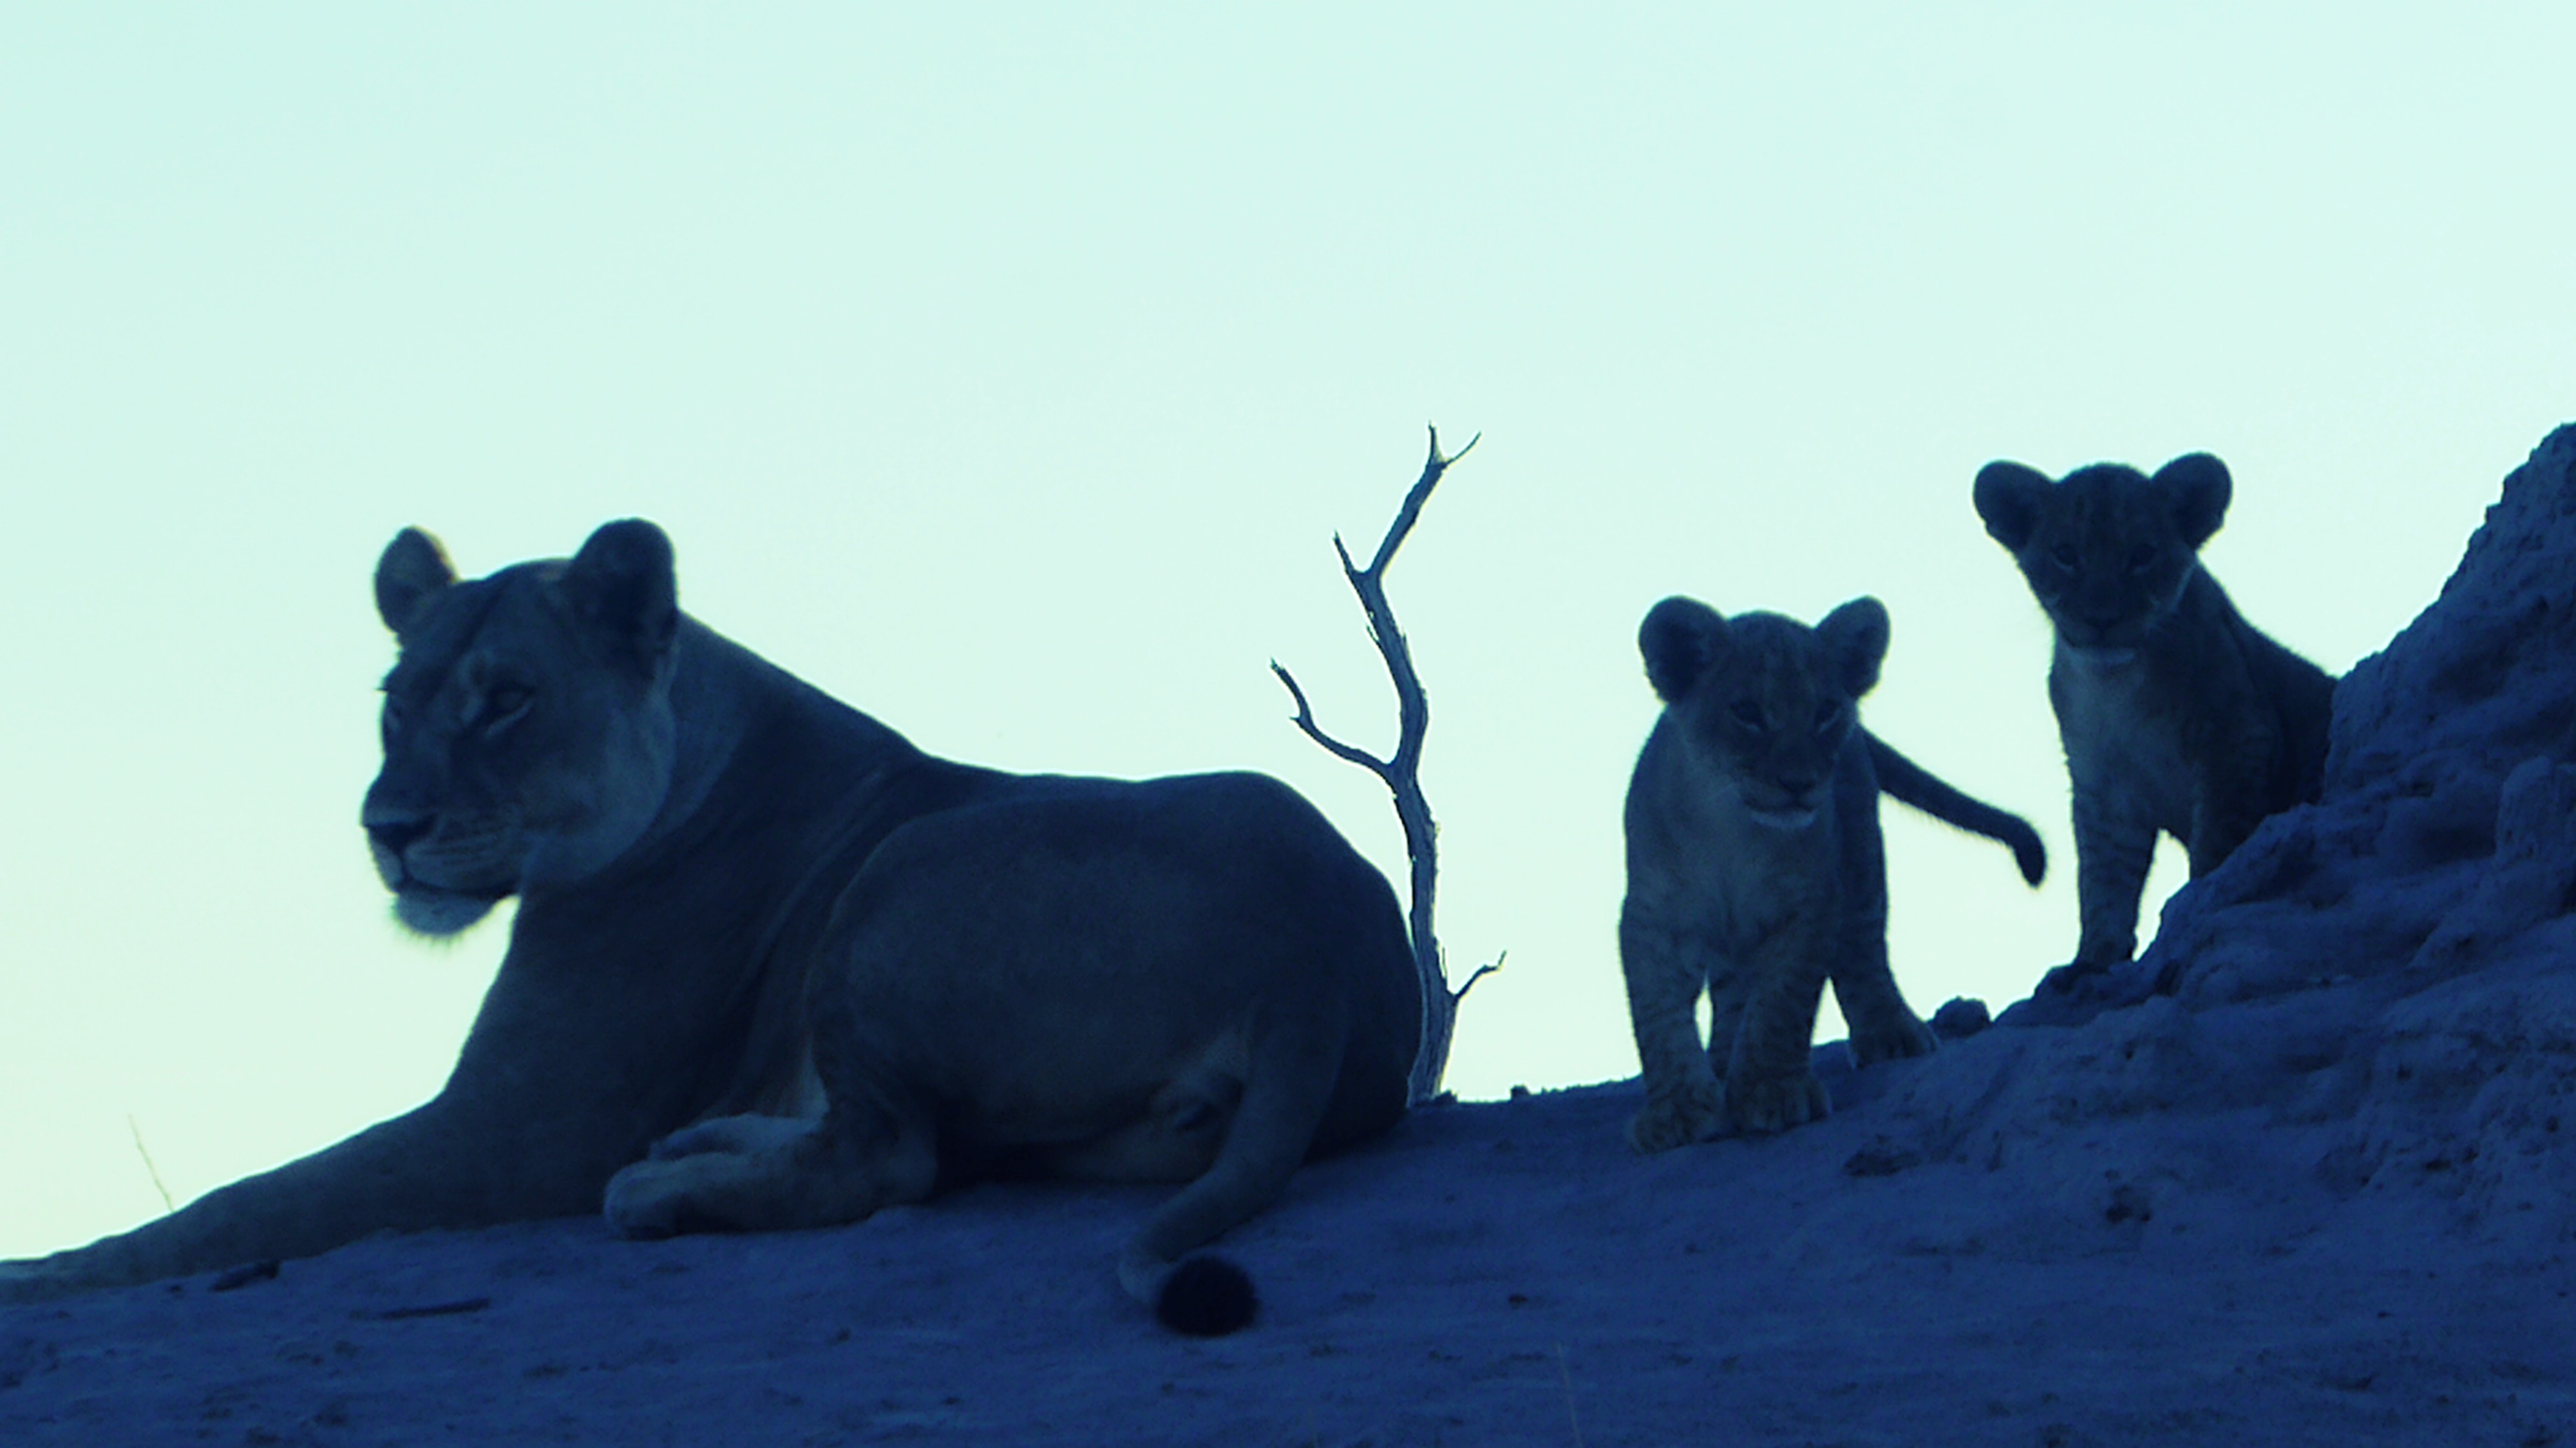 Lioness and 2 cubs in blue Selinda